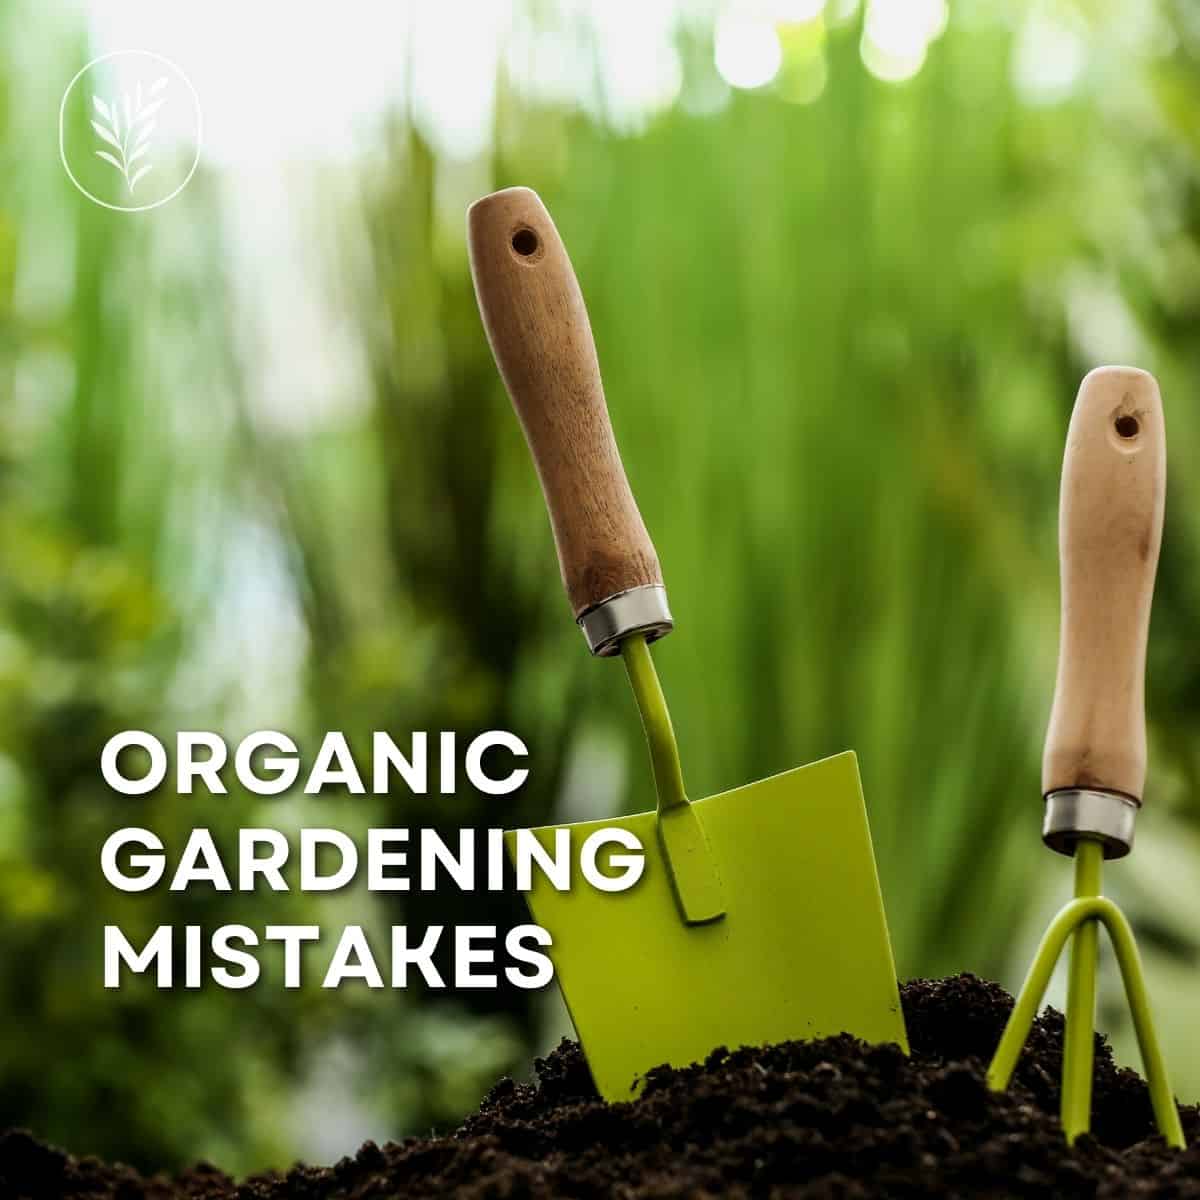 Wondering about organic gardening and trying not to make too many mistakes? There is something so wonderfully idyllic about a home garden. They definitely shouldn't conjure up images of scary chemicals. That being said, there are some really common ways that your little backyard organic garden can become contaminated. Here are the top 5 things to avoid in your organic garden. Via @home4theharvest